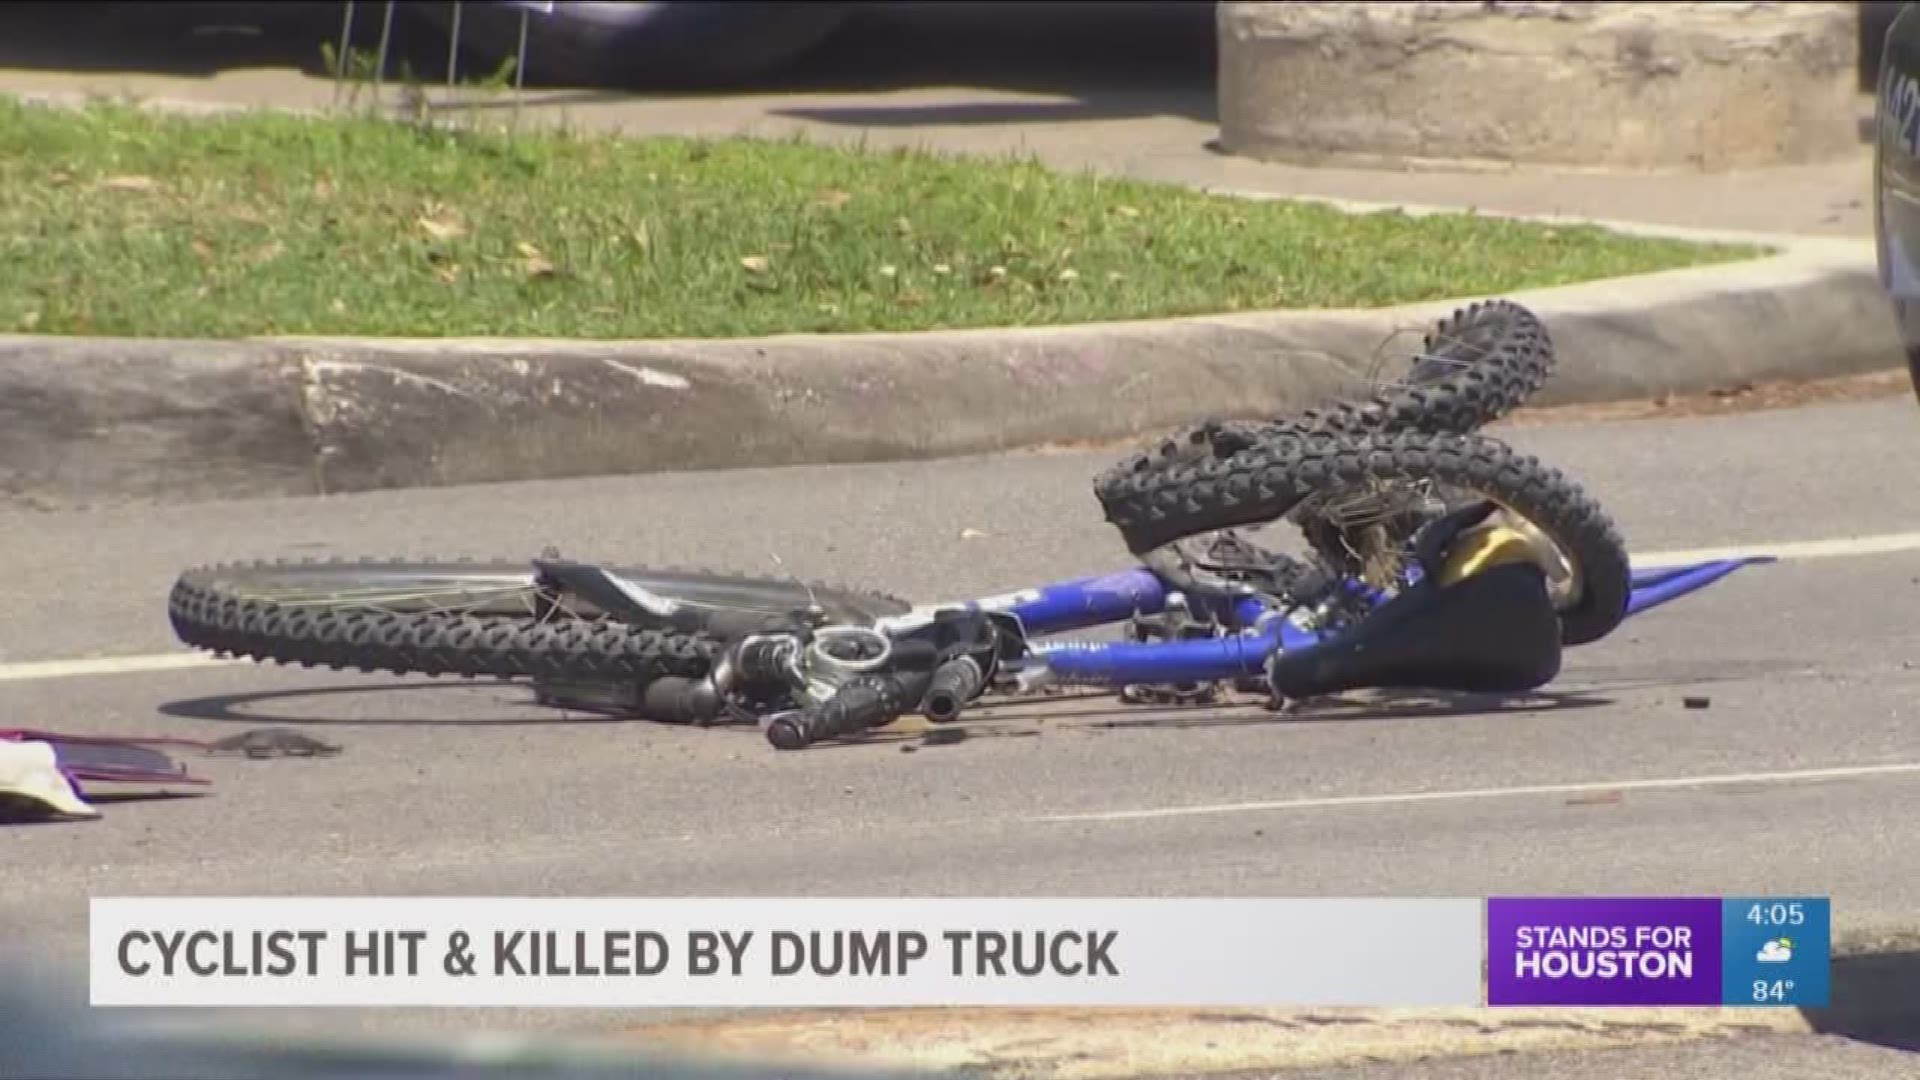 A cyclist is dead after she was struck by a dump truck near Rice University. The accident happened right in front of a memorial for another cyclist killed last year. 